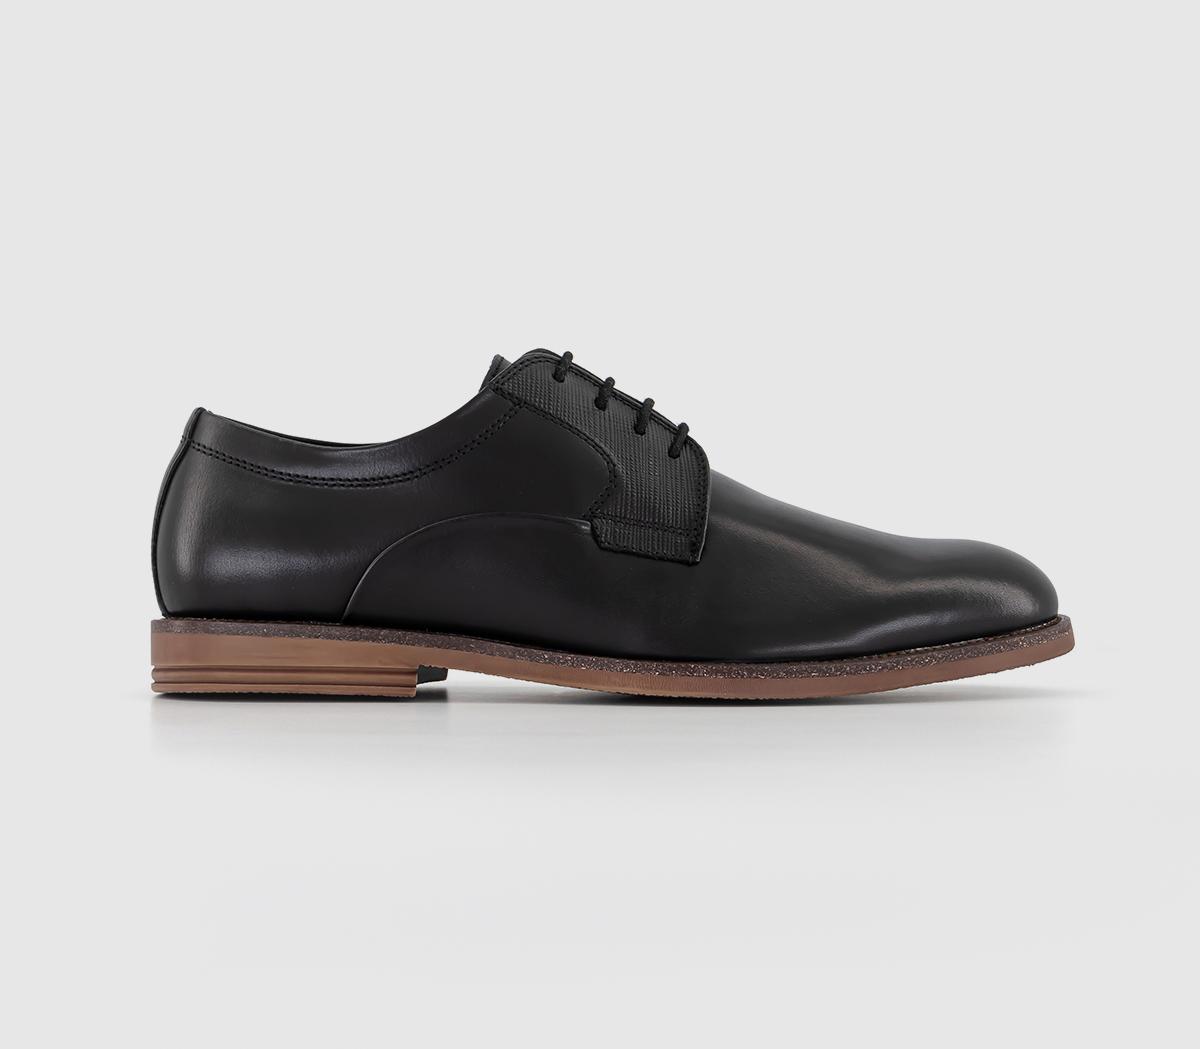 OFFICEMatteo Embossed Flexi Sole Derby ShoesBlack Leather